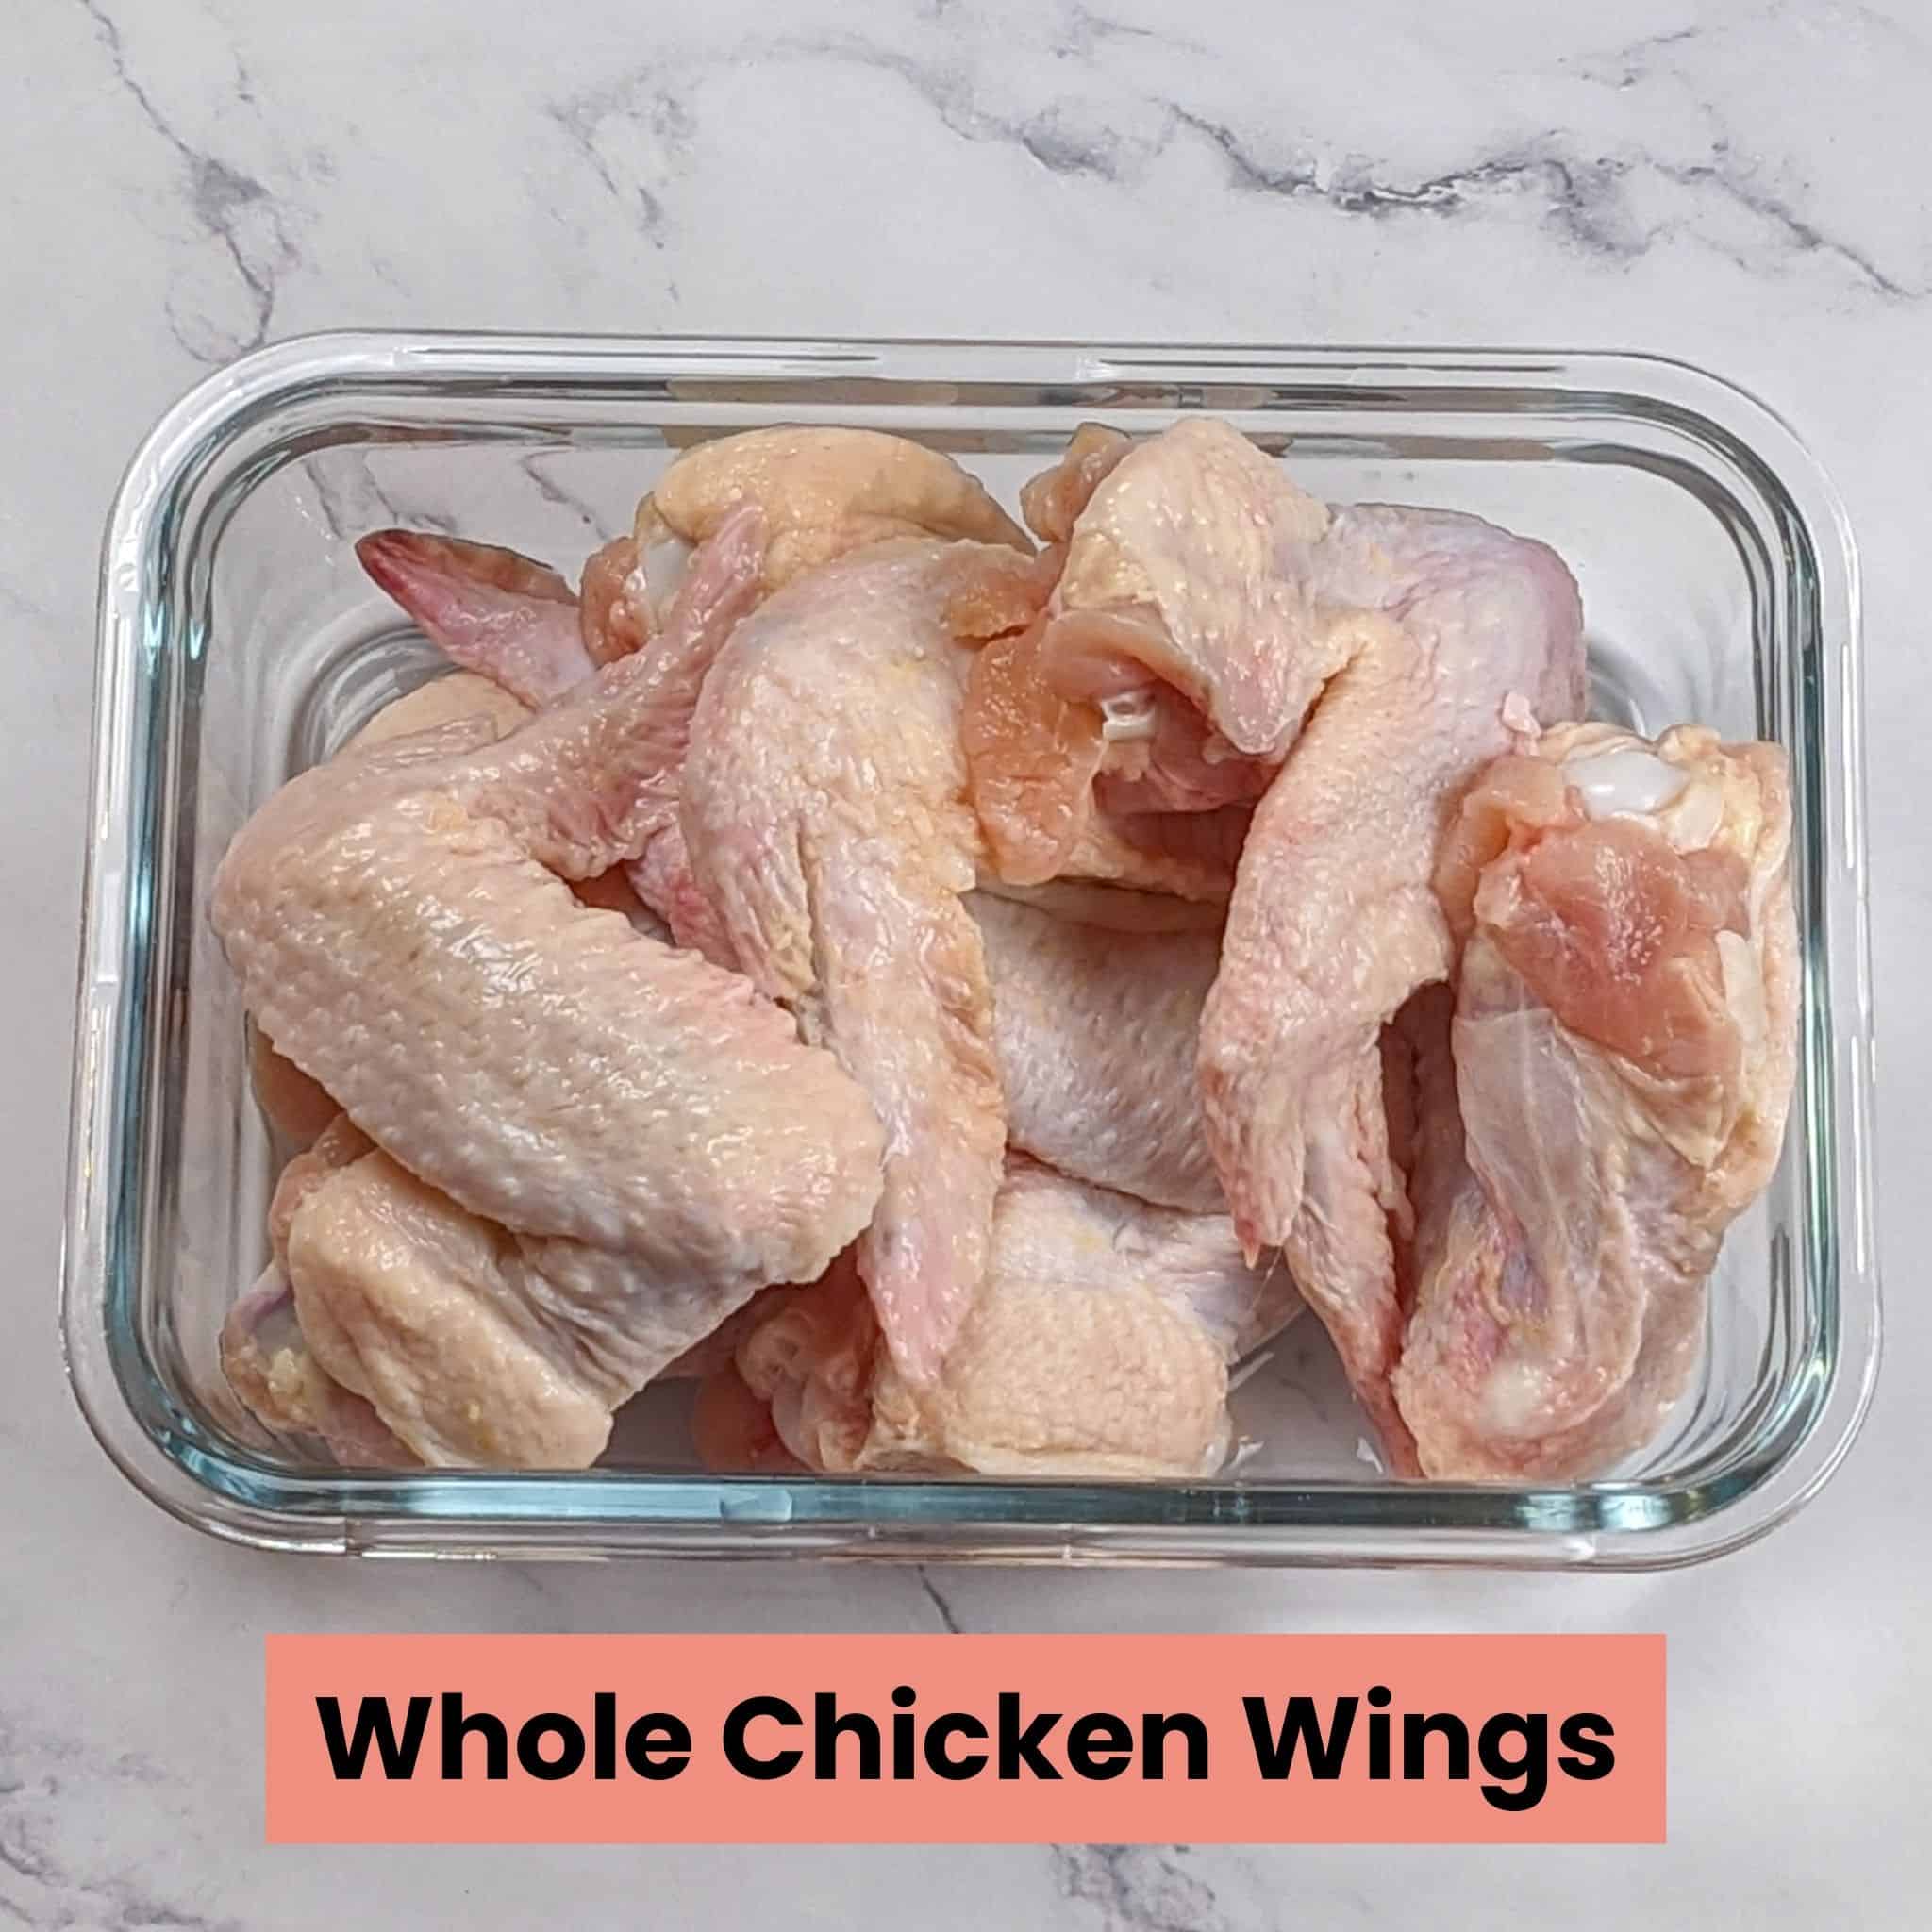 raw whole chicken wings in a rectangle glass dish